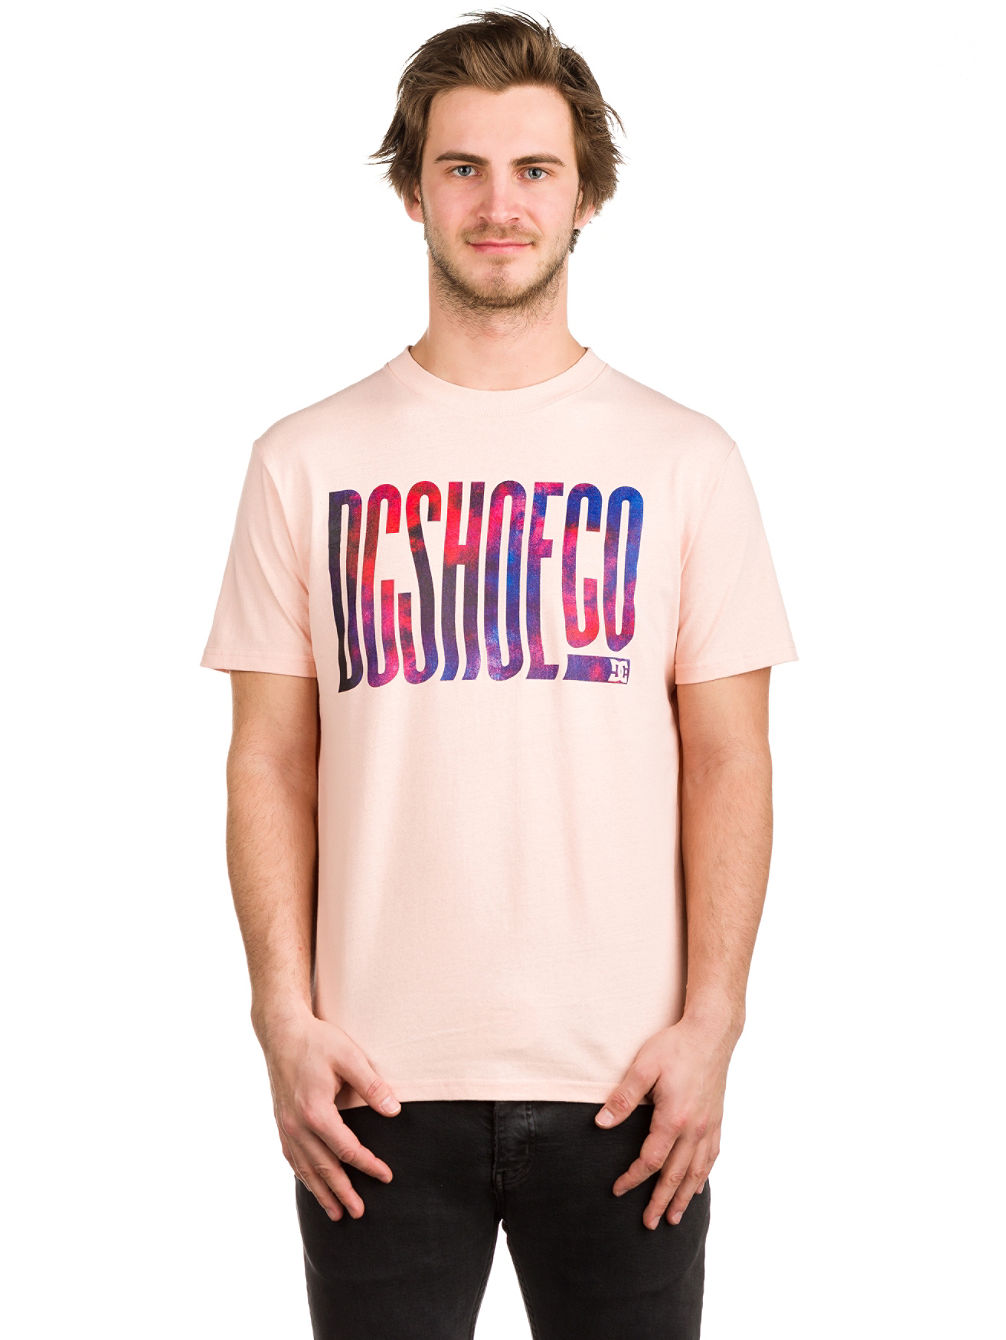 Trippy Typed T-Shirt